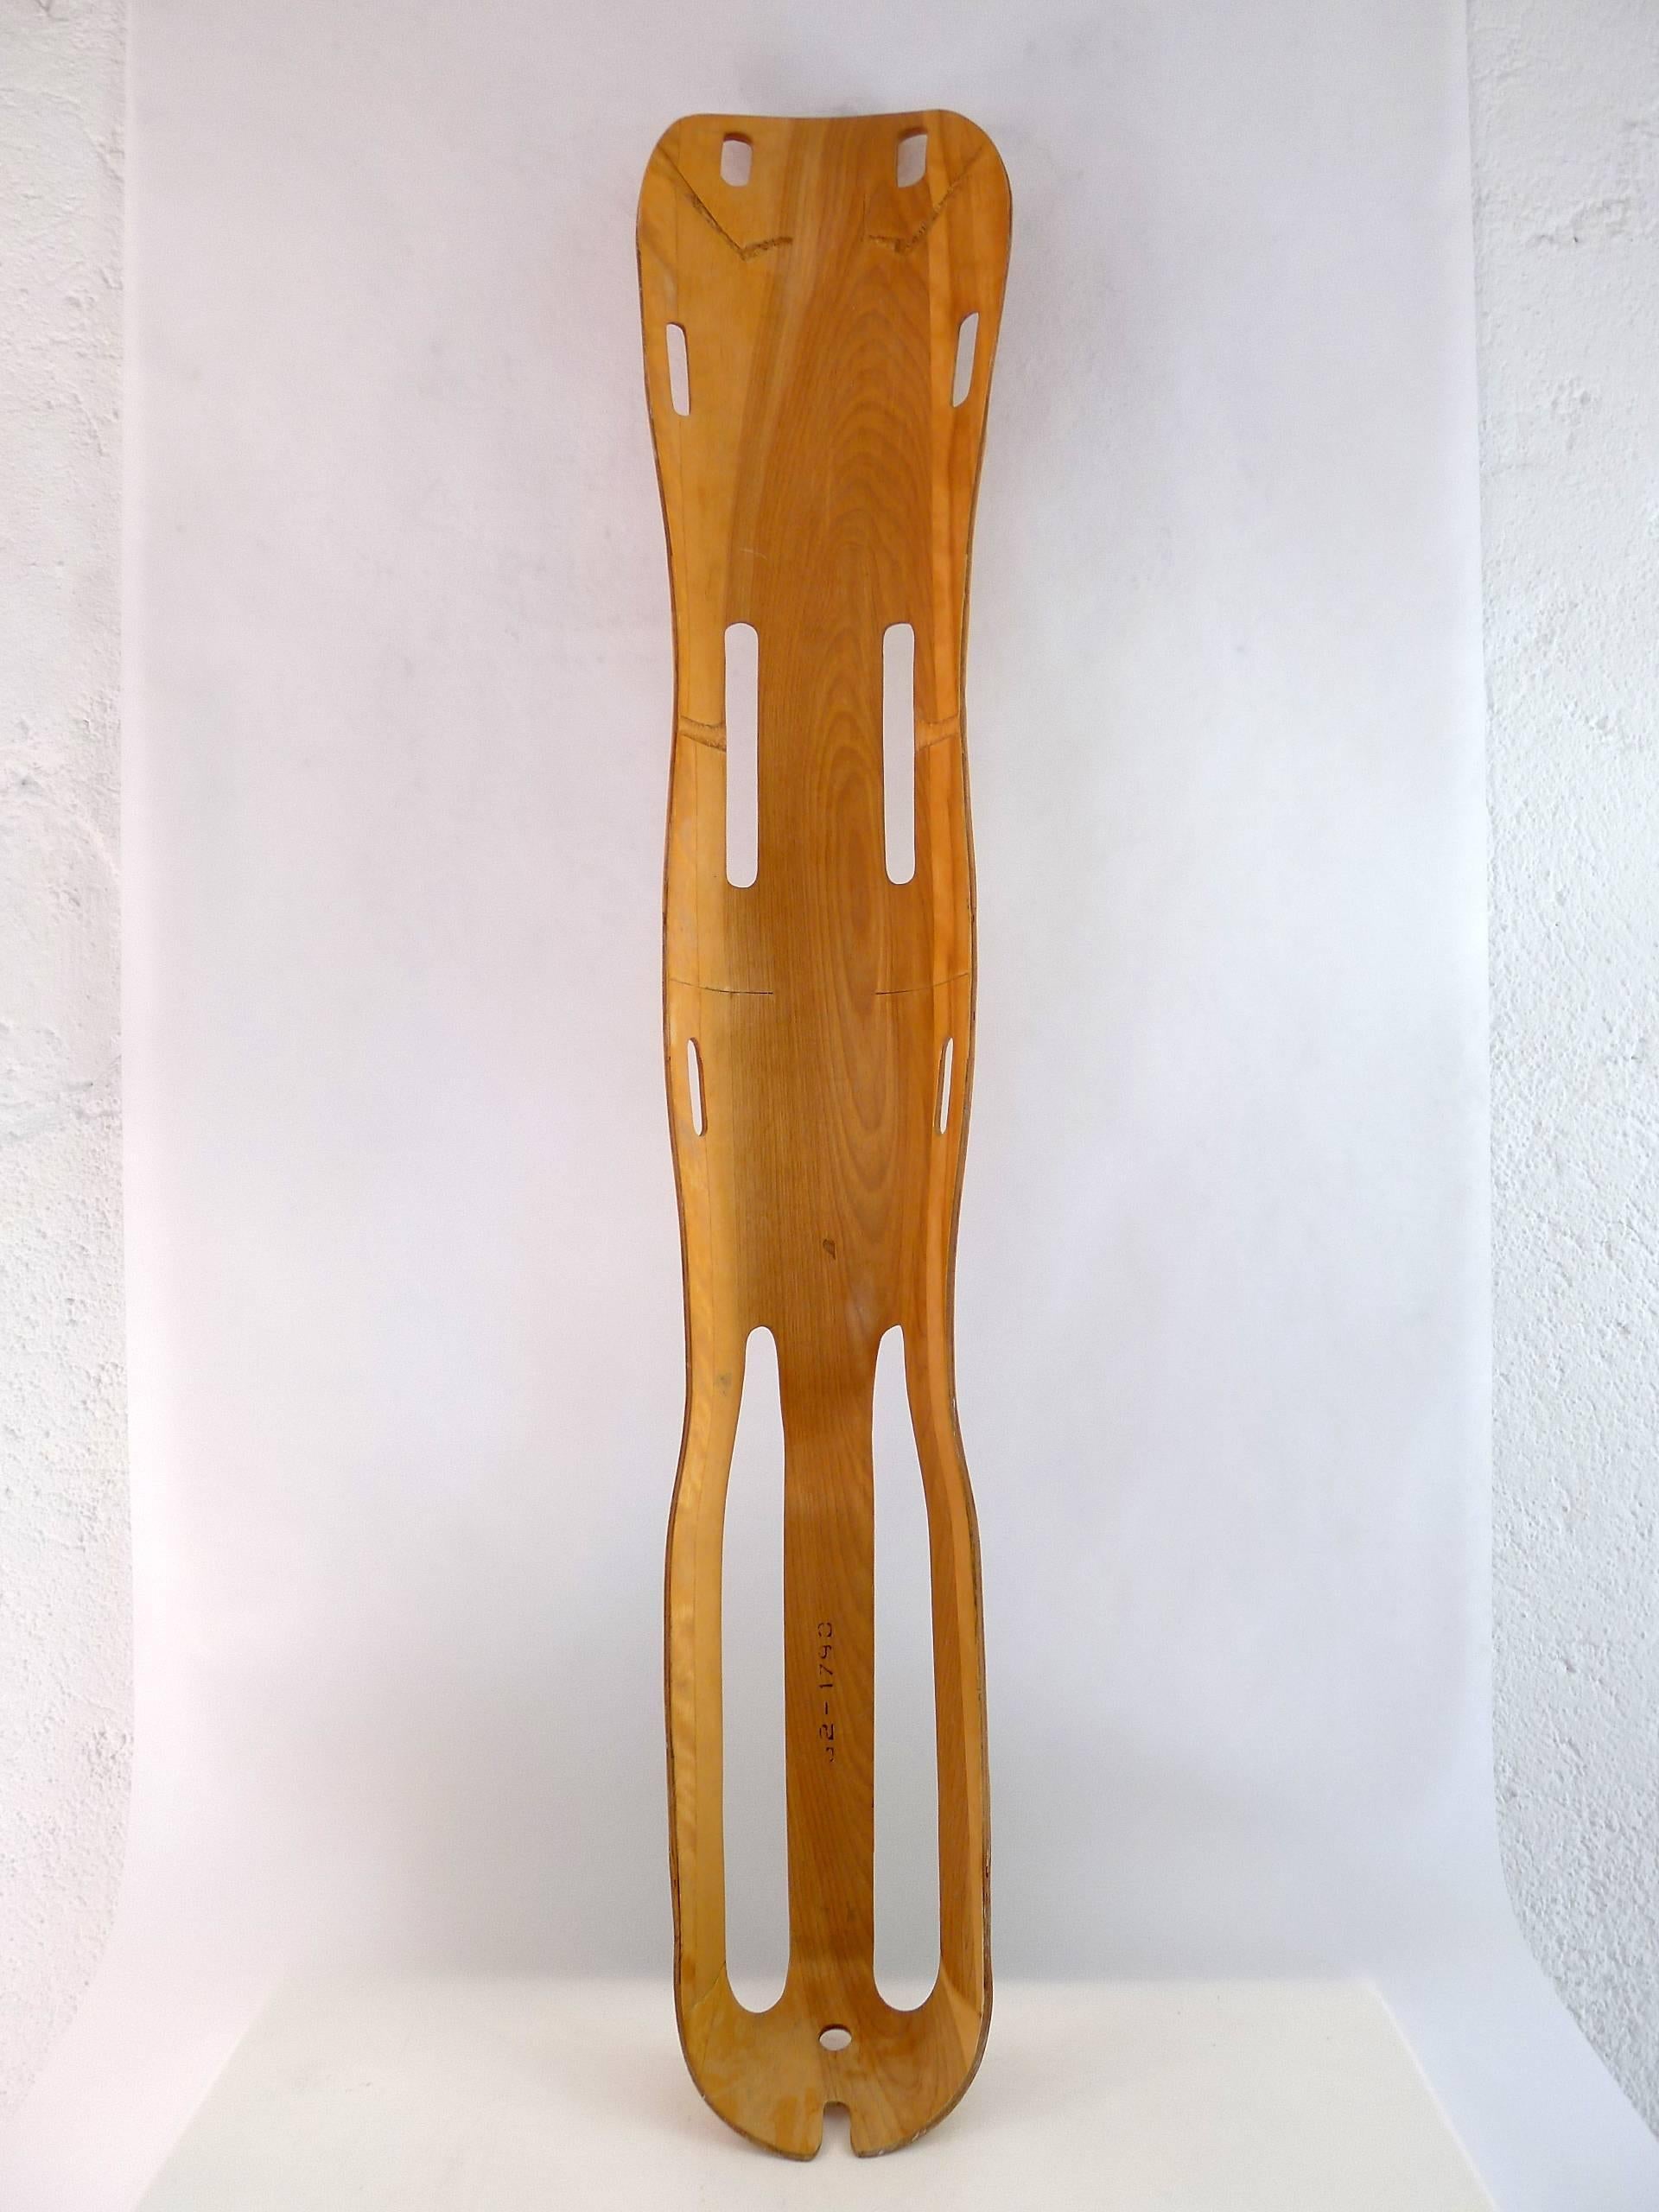 A leg splint designed by Charles and Ray Eames during WW II for the US Navy , produced by Evans Products

Not only a leg splint but a sculptural piece from the innovative process of bending and molding plywood, precursory to the post-war furniture